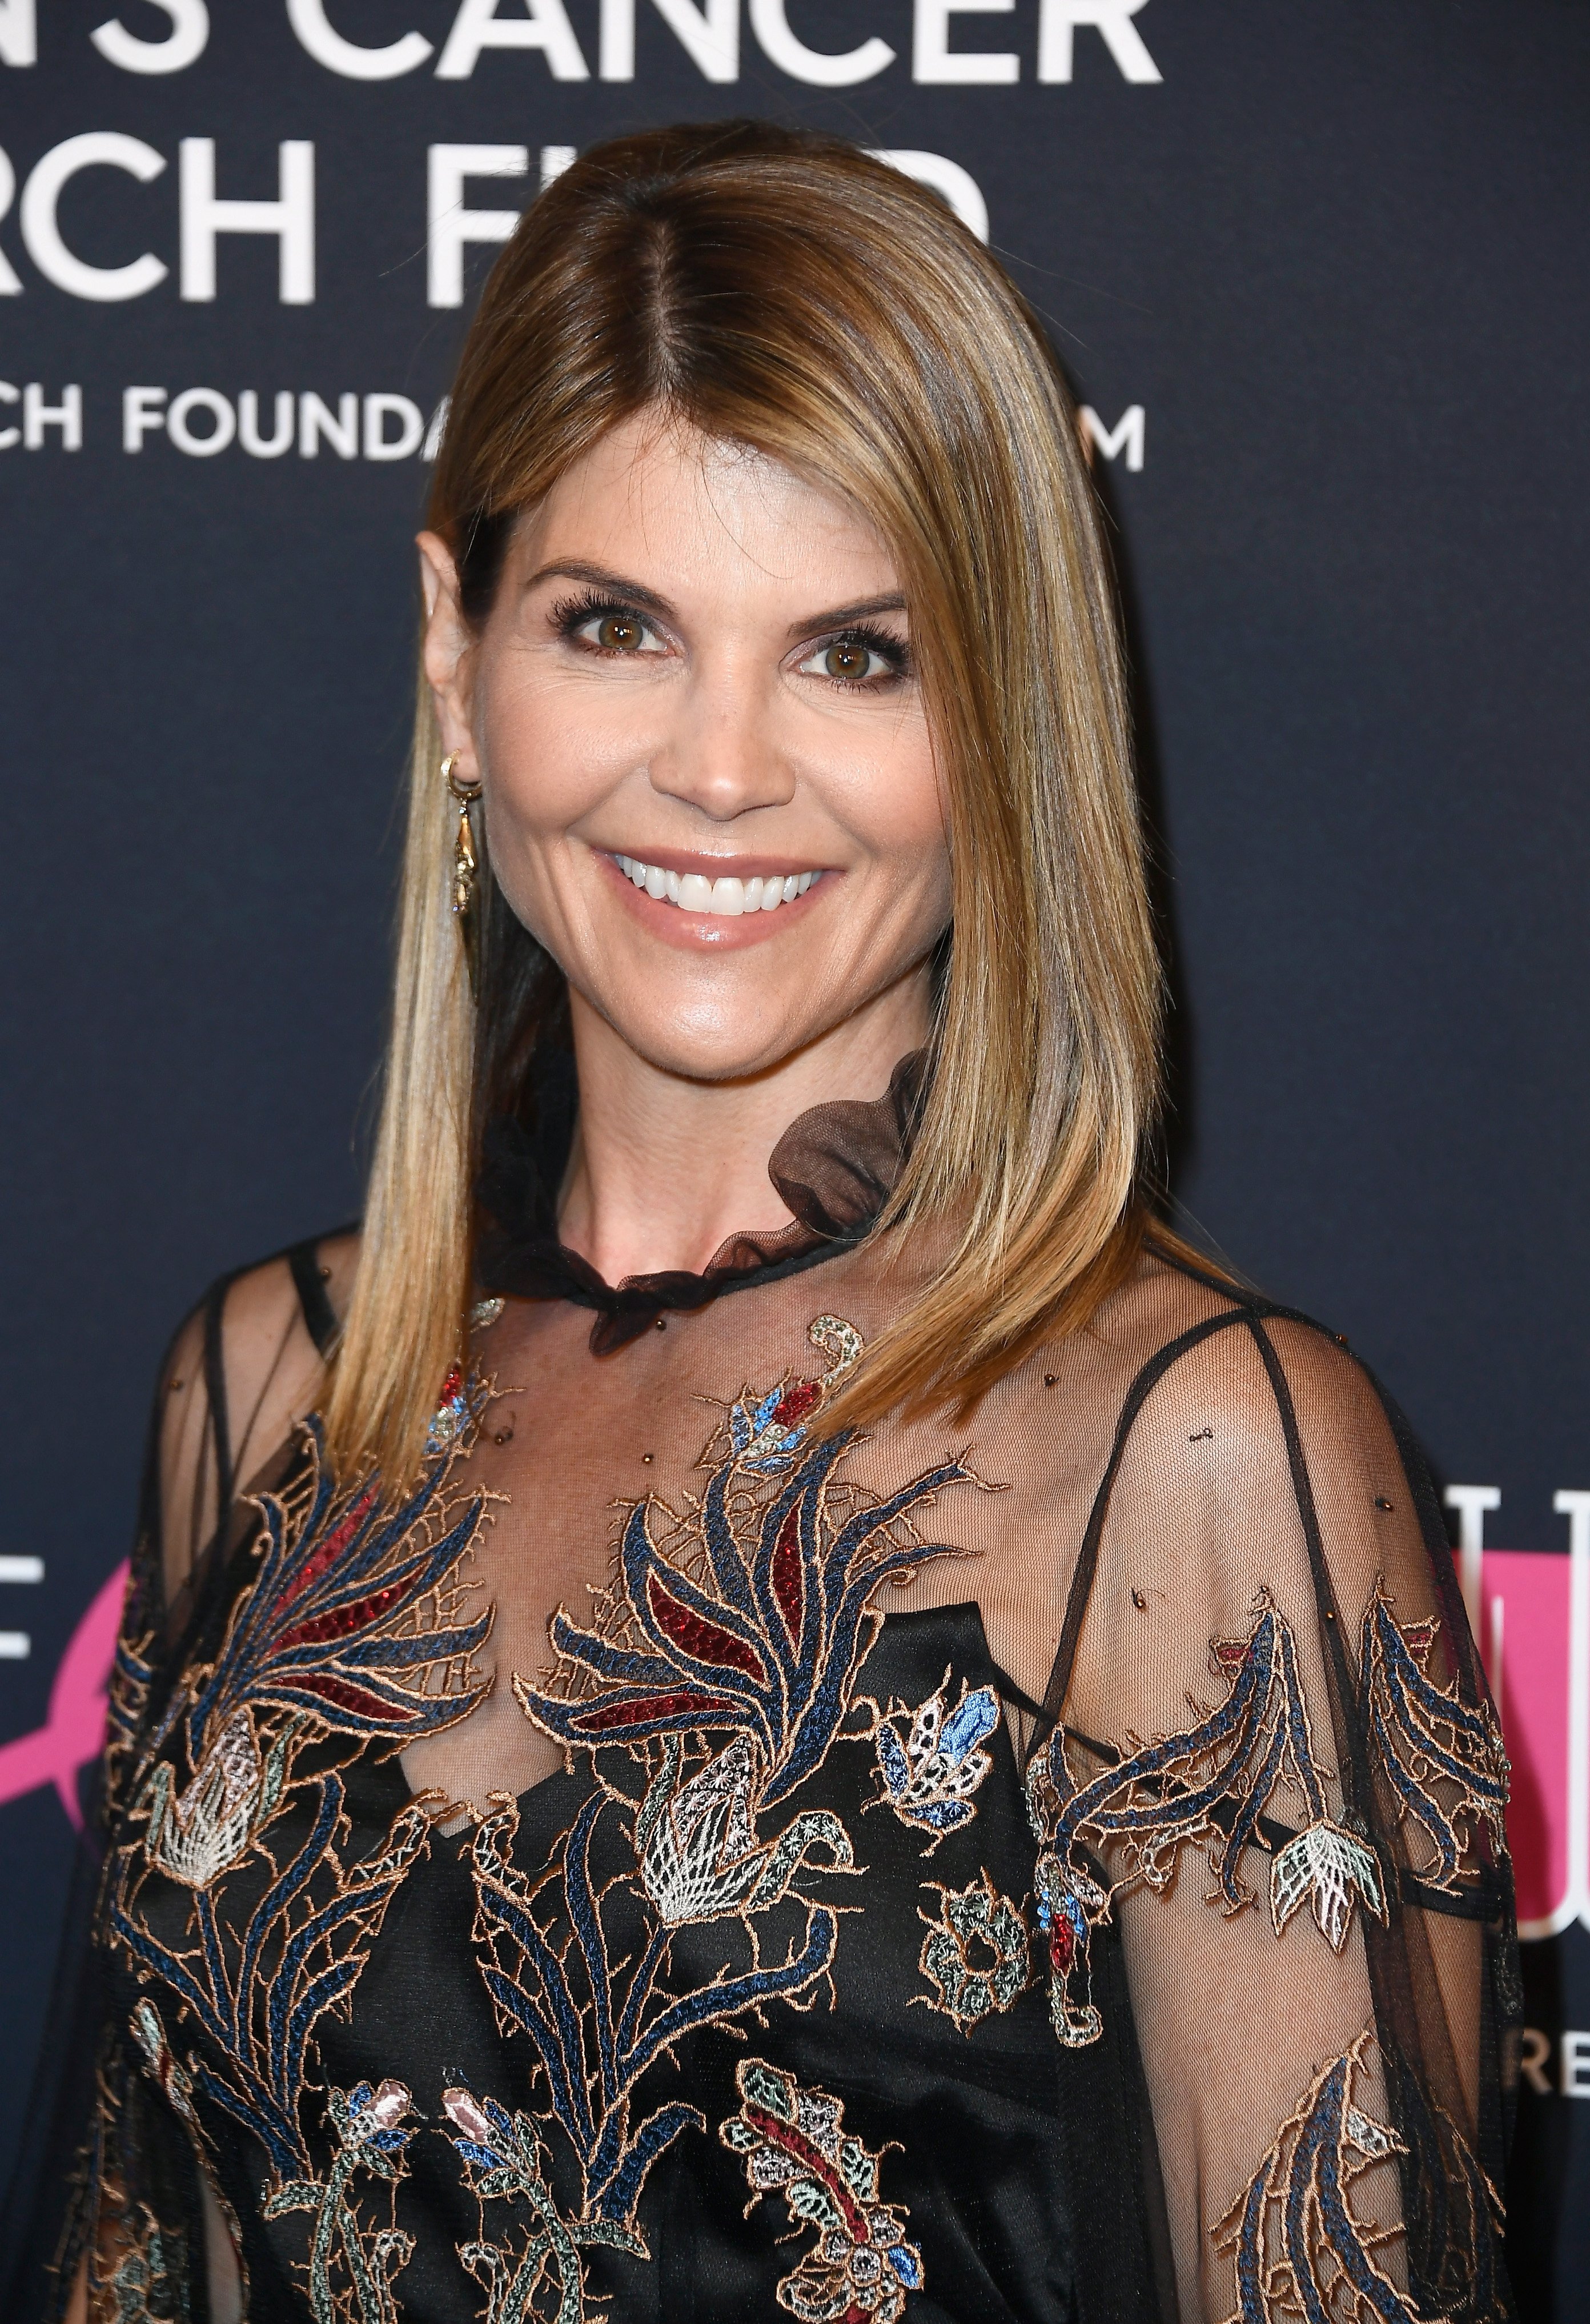 Lori Loughlin attends WCRF's "An Unforgettable Evening" at the Beverly Wilshire Four Seasons Hotel on February 27, 2018 in Beverly Hills, California | Photo: Getty Images